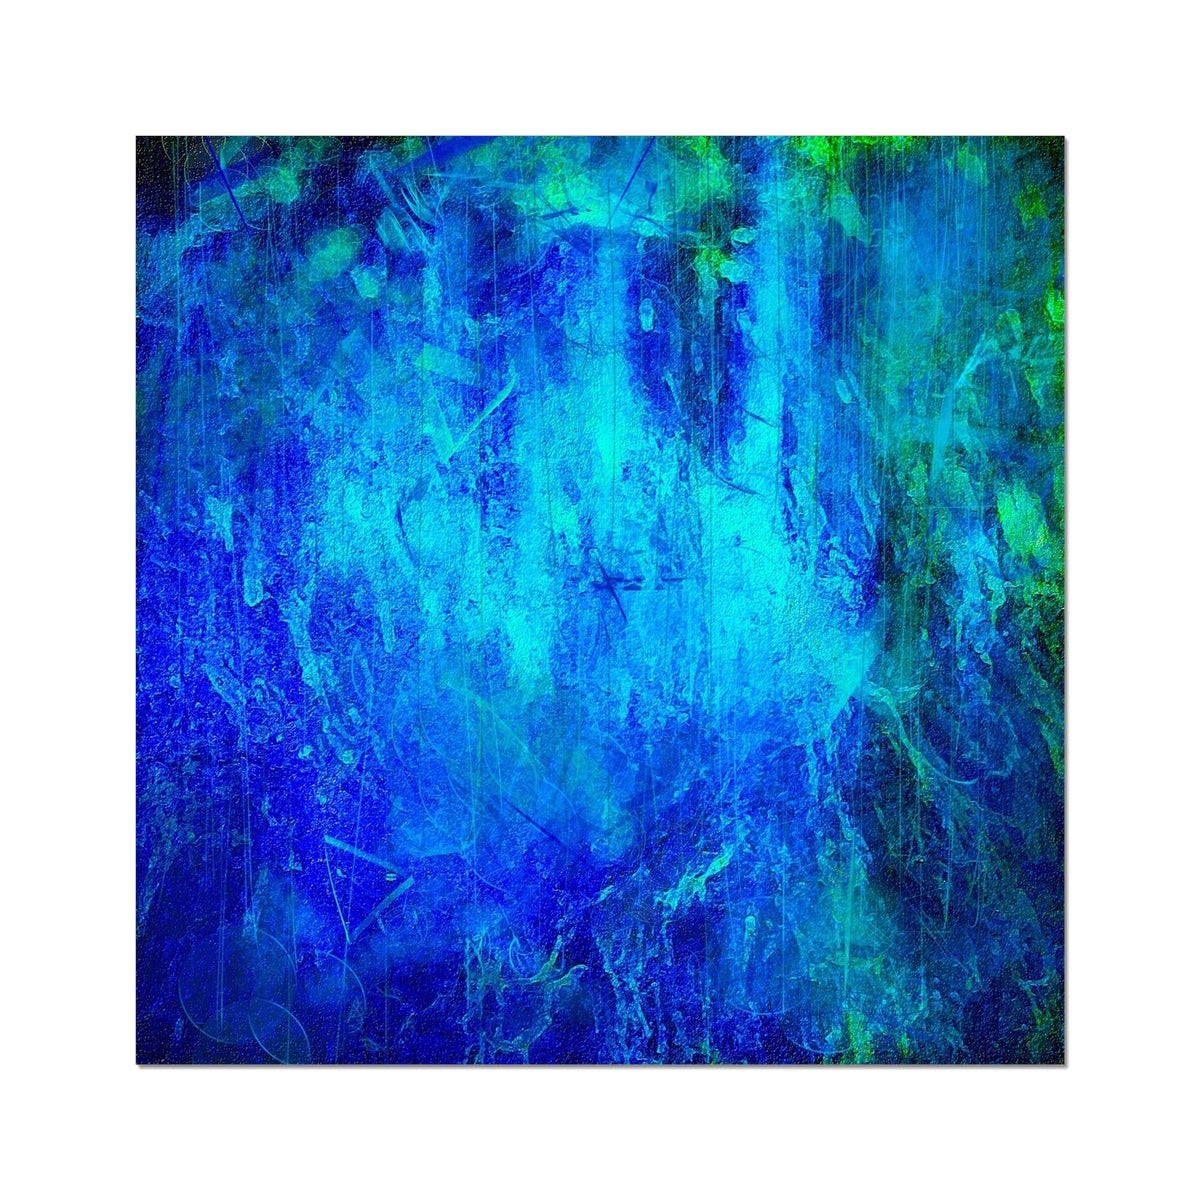 The Waterfall Abstract Painting | Fine Art Prints From Scotland-Unframed Prints-Abstract & Impressionistic Art Gallery-24"x24"-Paintings, Prints, Homeware, Art Gifts From Scotland By Scottish Artist Kevin Hunter